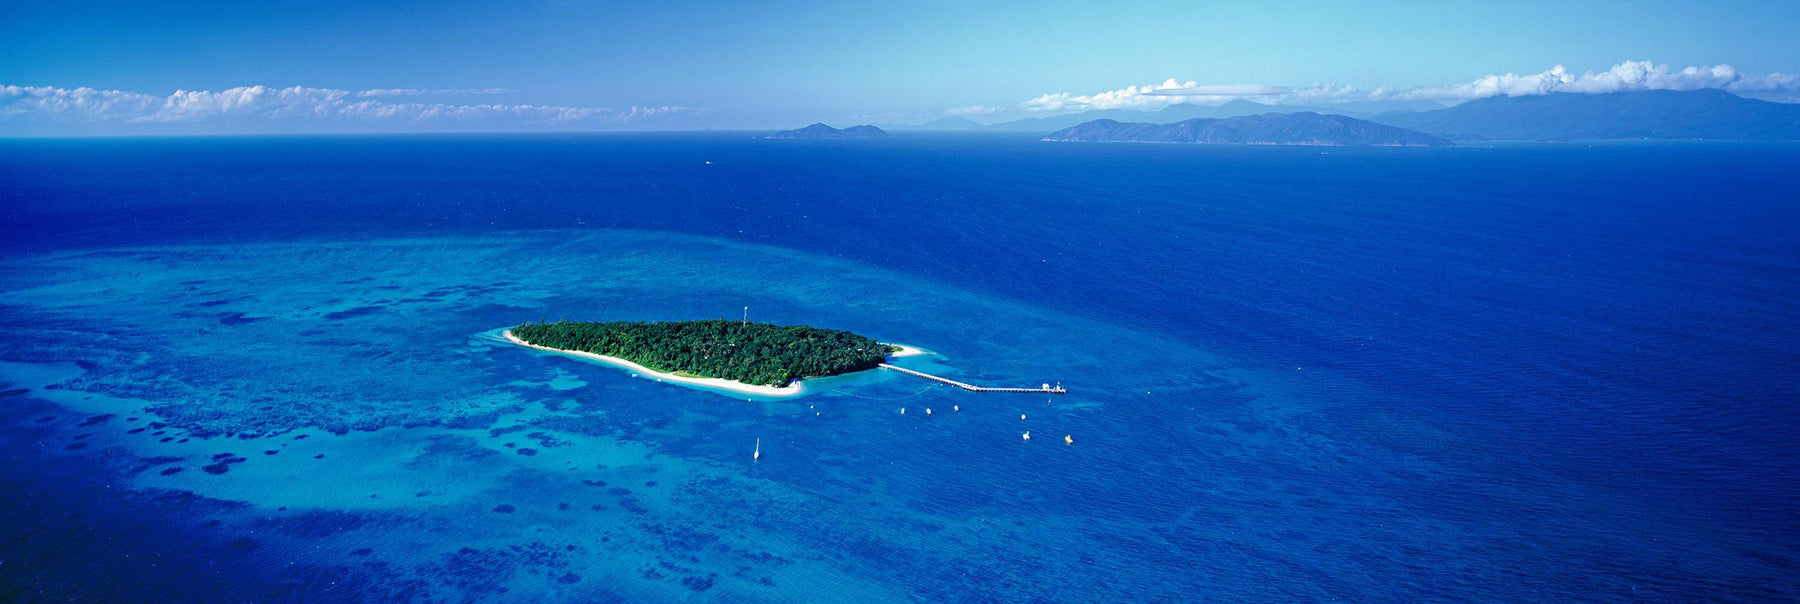 Aerial view of Green Island full of trees with a pier and boats surrounded by the Great Barrier Reef Australia